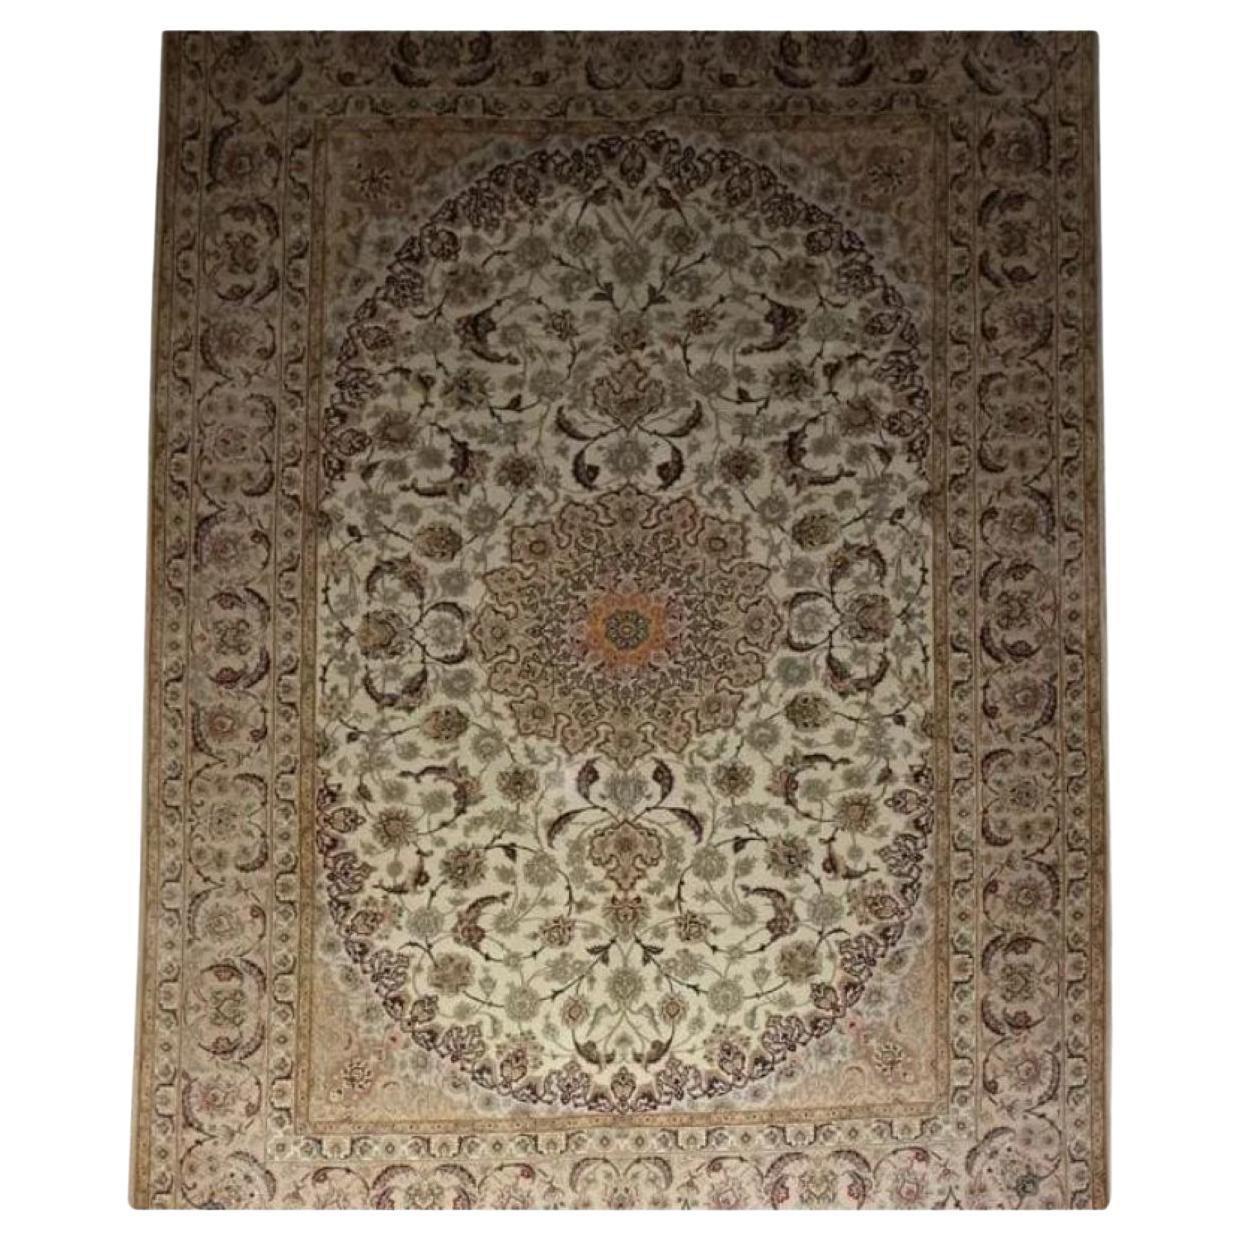 Very fine Persian Isfahan Silk & Wool Rug - 11.6' x 8.4' For Sale